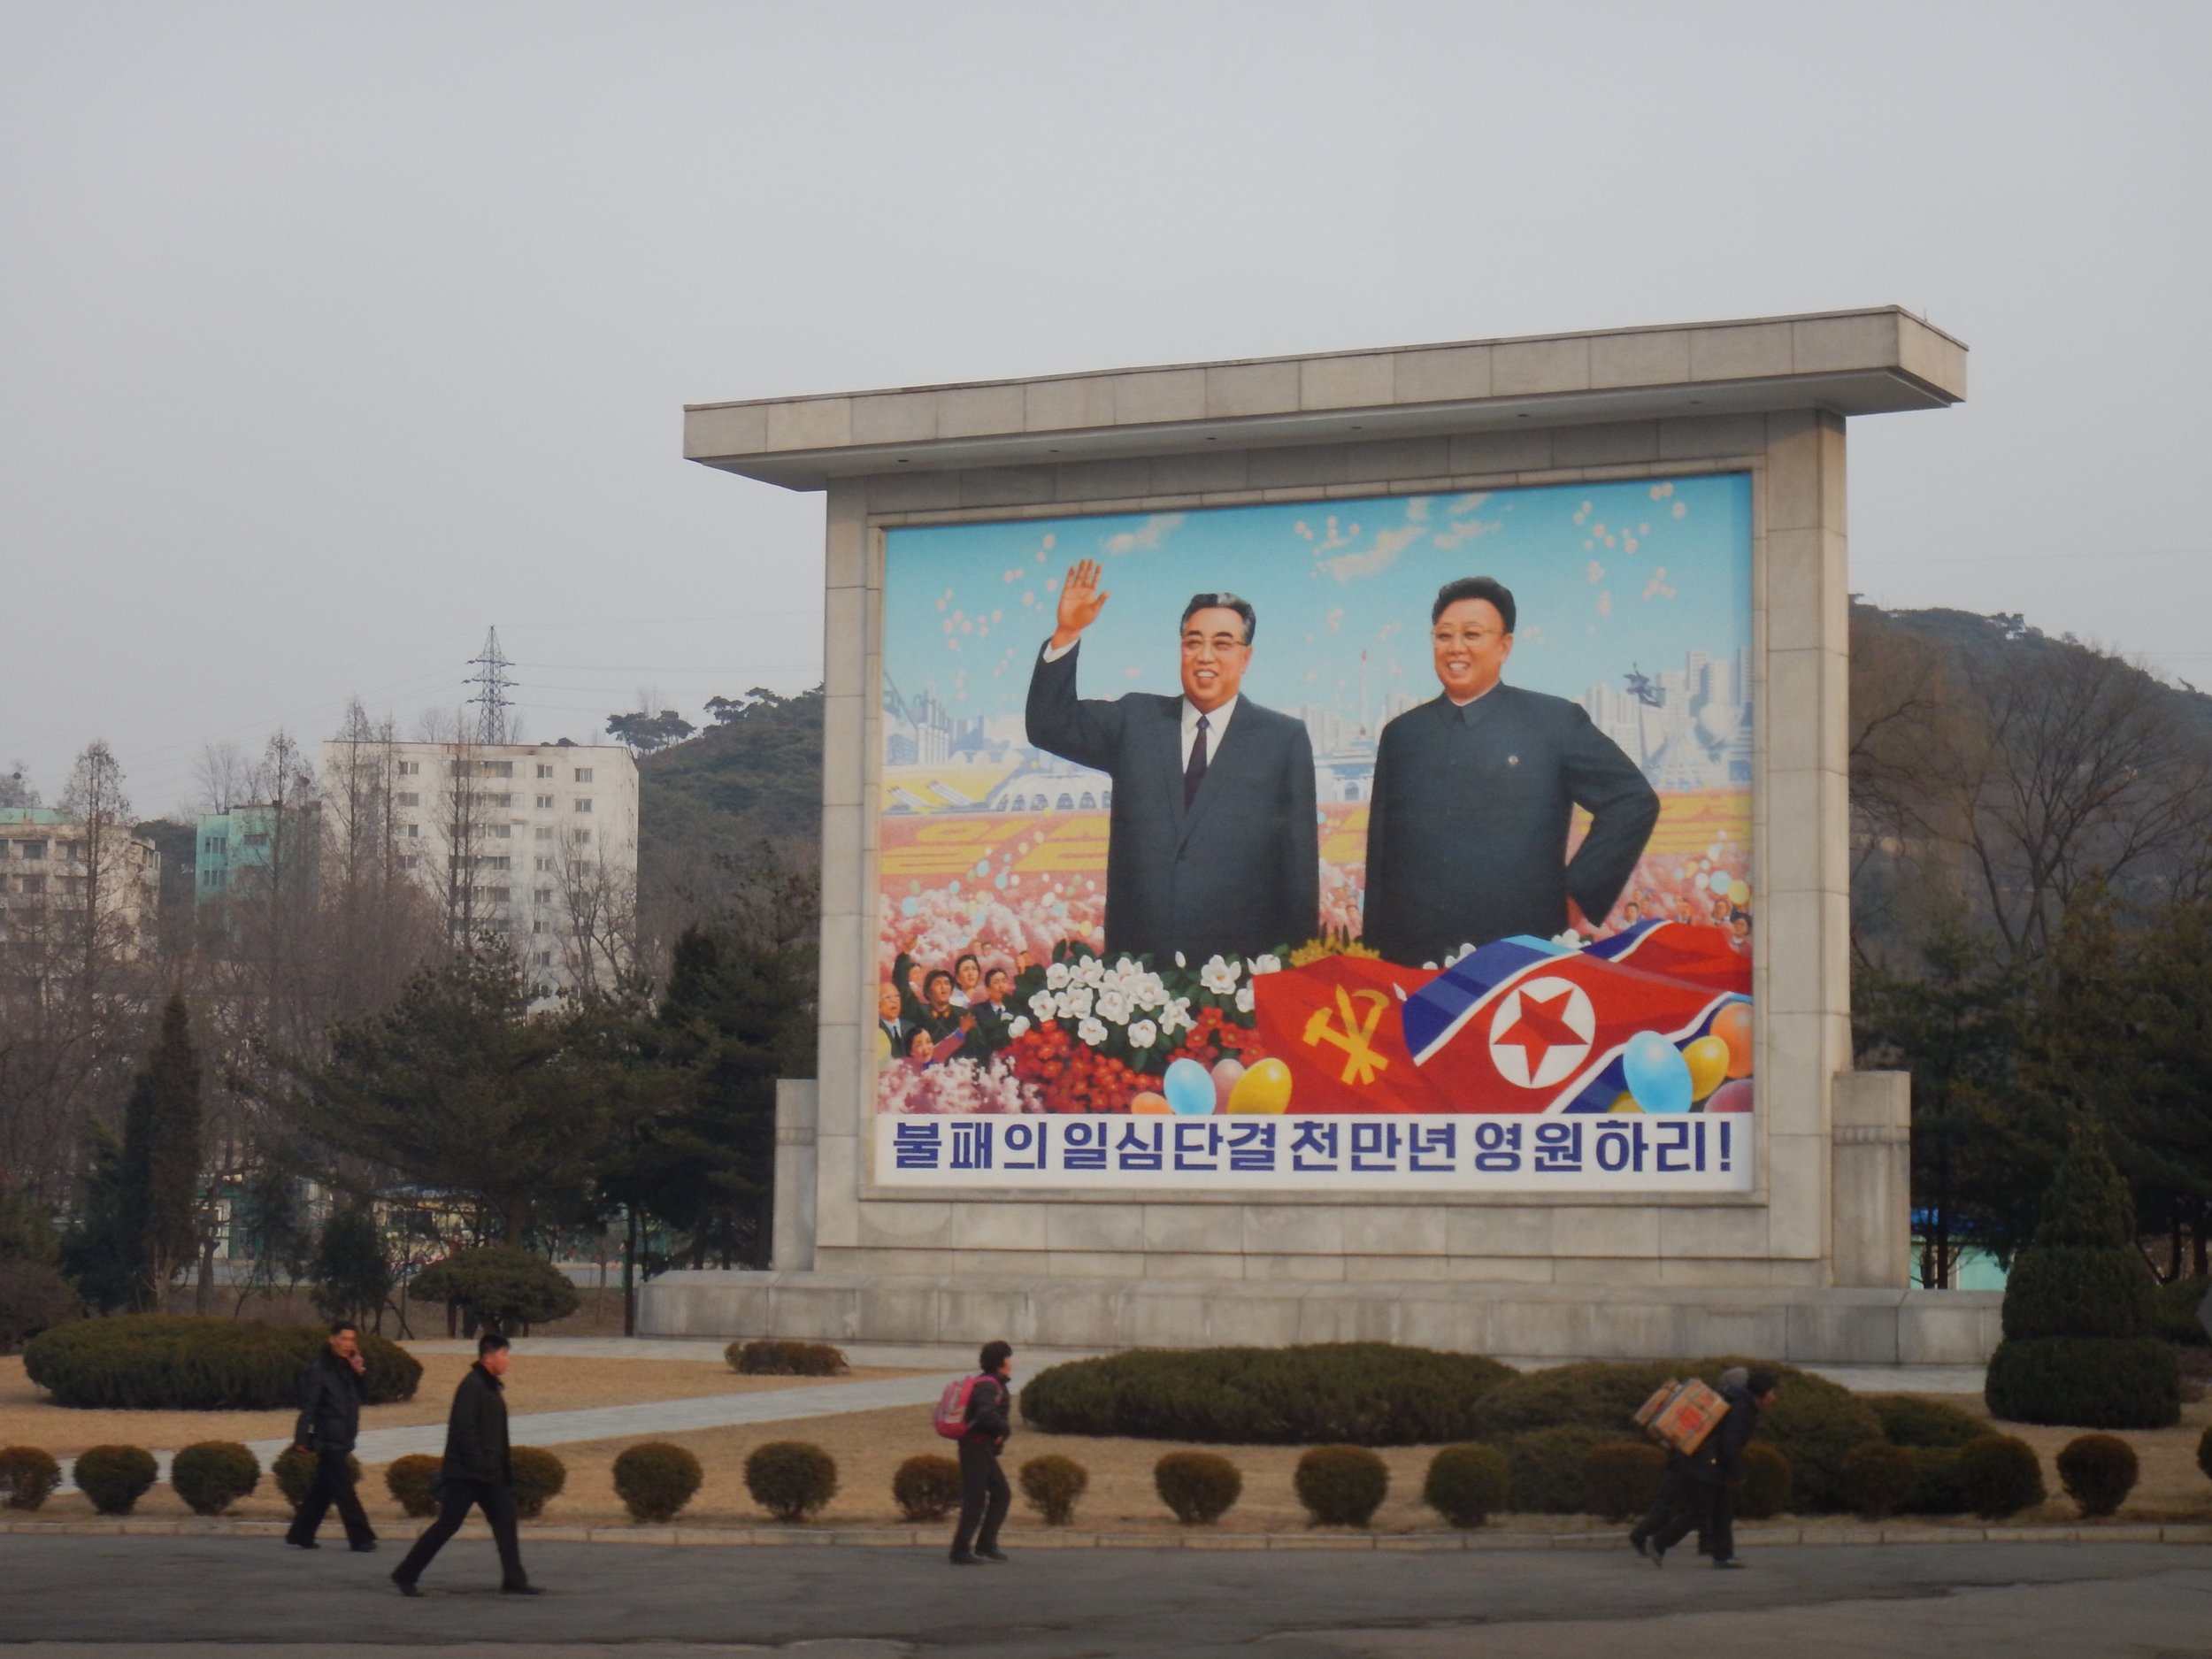  Hand-painted propaganda murals like this one in Pyongyang, featuring Kim Il-sung and Kim Jong-il smiling in a field of flowers, are commonplace in many larger North Korean cities. (Photo by Ethan Jakob Craft.) 